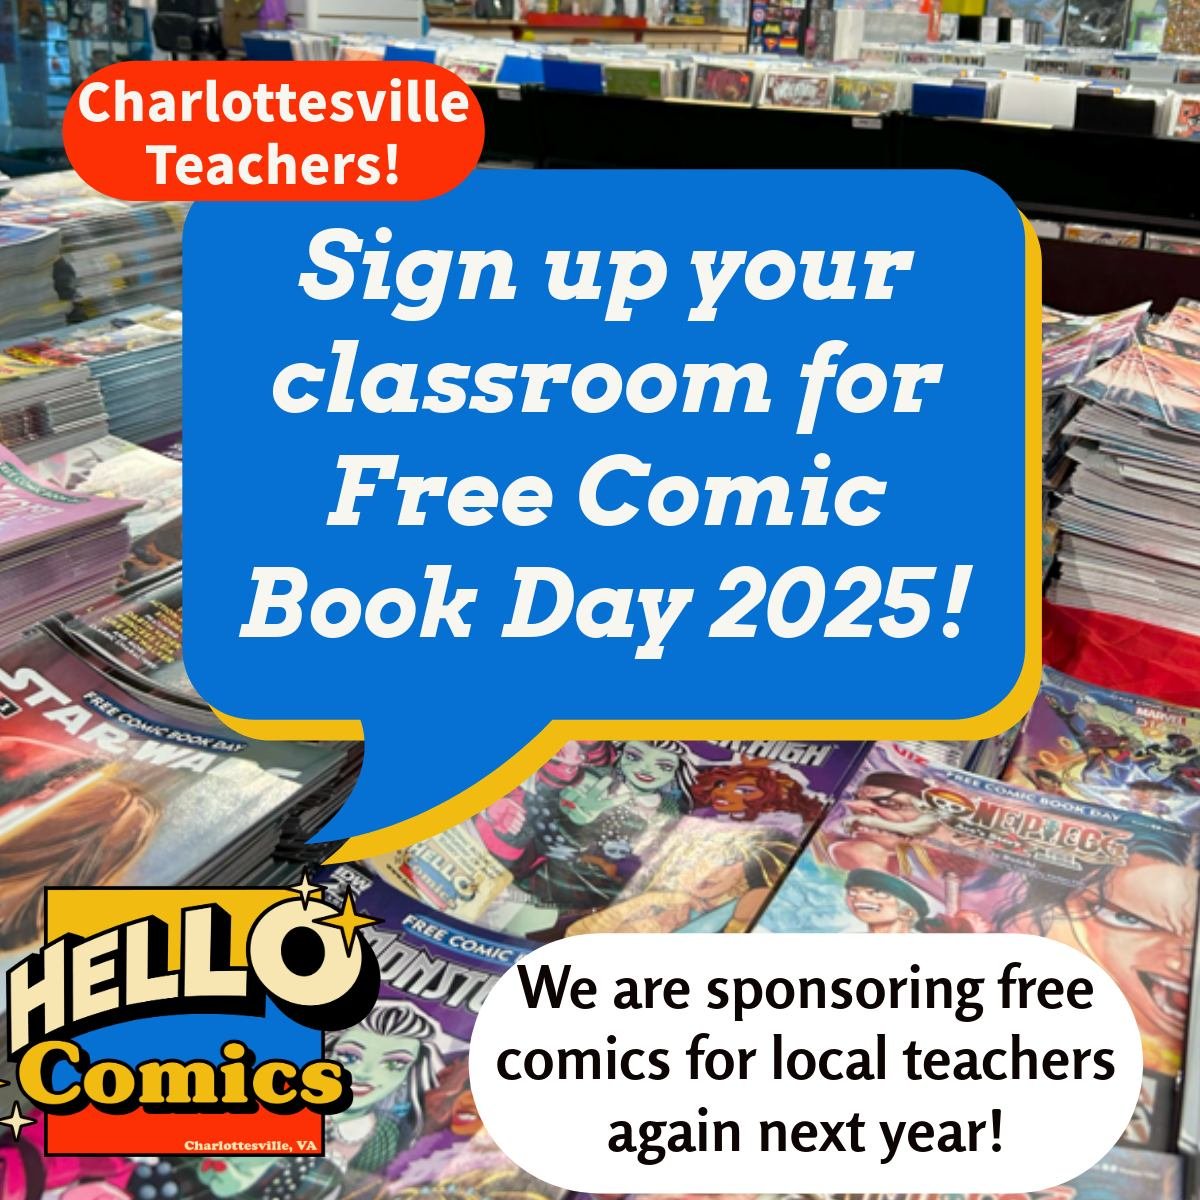 We had so much fun at Free Comic Book Day last week! We're opening up Library/Classroom signups for next year. More info on our website. Please spread the word, share this post, and tag your teacher/librarian friends in Charlottesville/Albemarle.